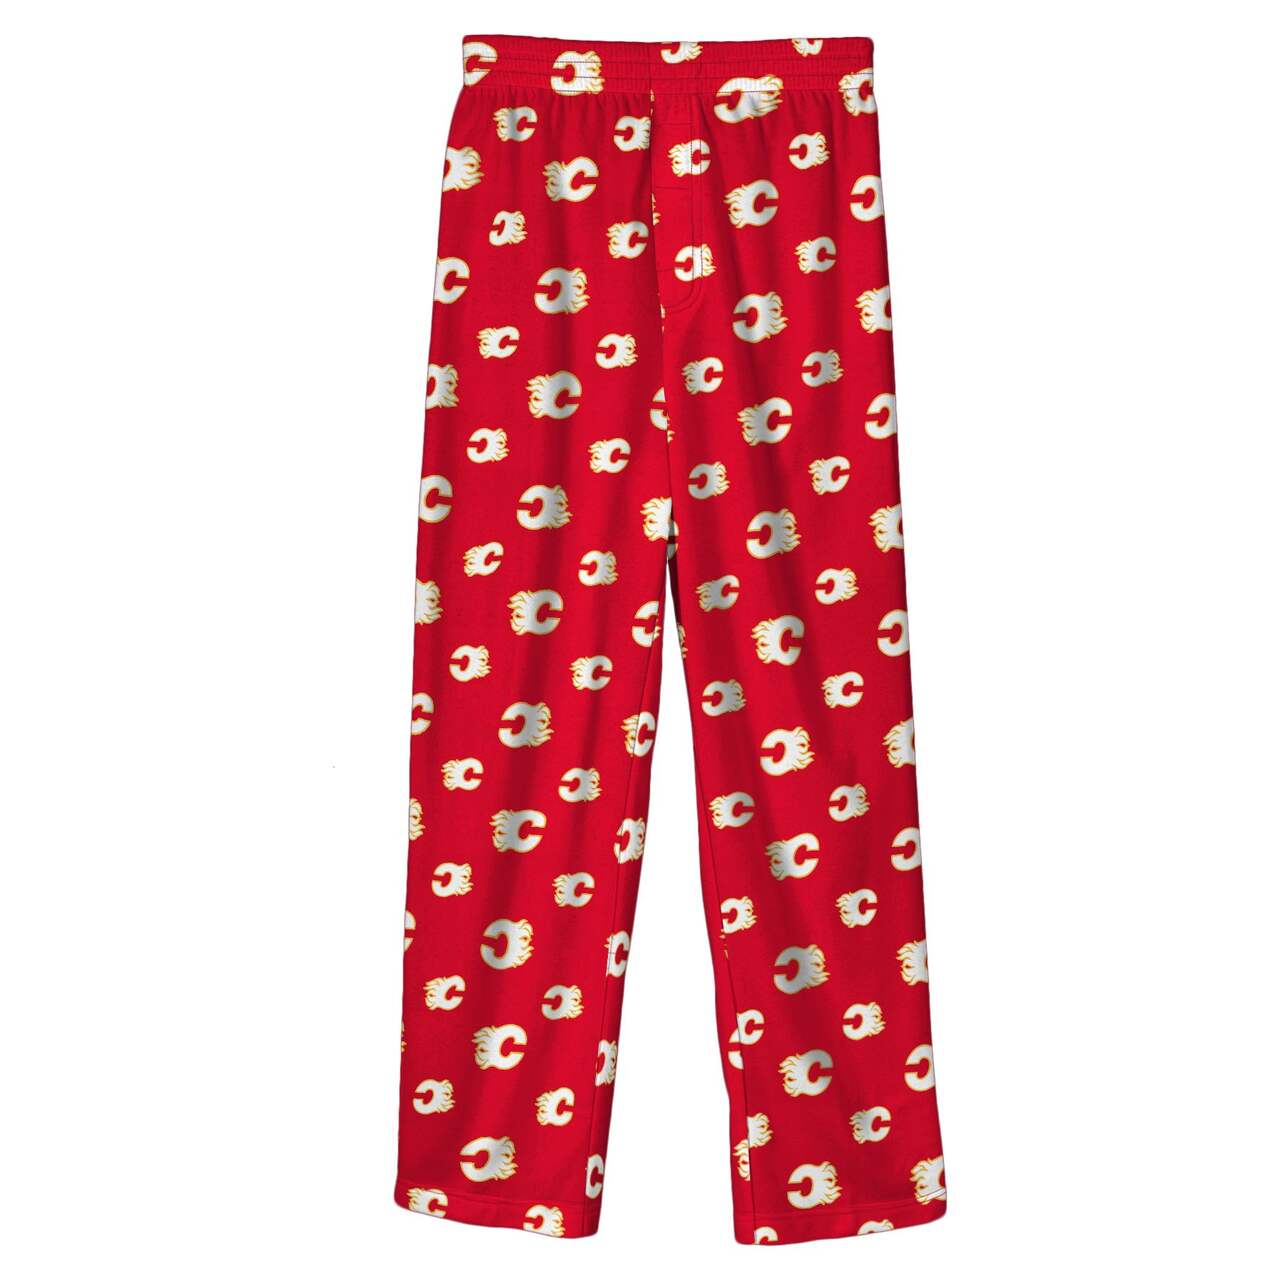 https://media-www.canadiantire.ca/product/playing/hockey/hockey-accessories/0839001/calgary-flames-sleep-pant-small-cfc35d3f-1db2-4615-875b-7cfed6046cf7-jpgrendition.jpg?imdensity=1&imwidth=640&impolicy=mZoom